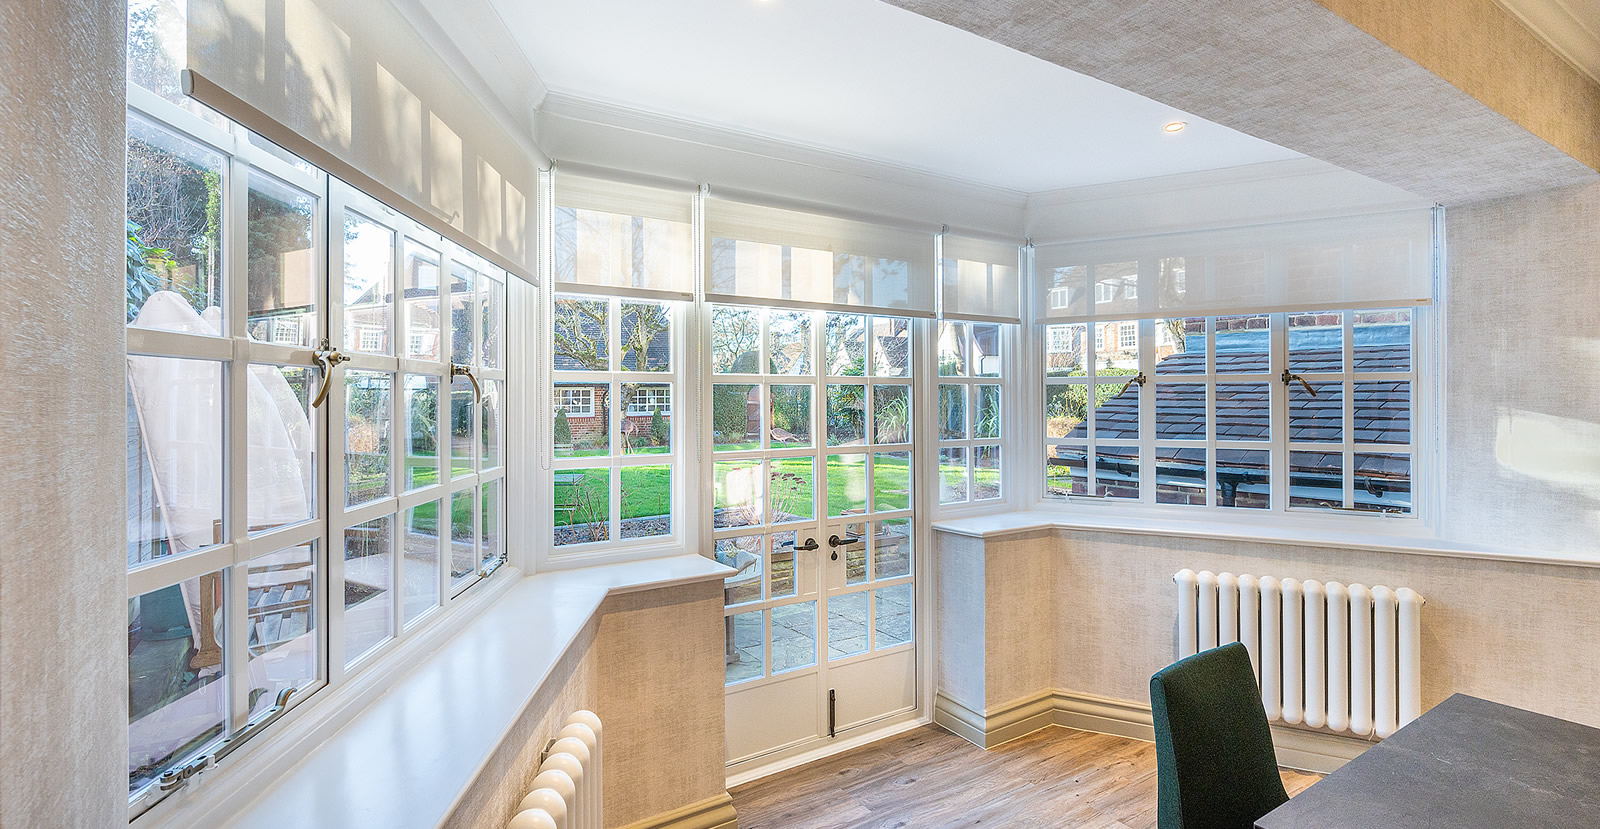 Brooking steel windows chosen for property in London Conservation Area